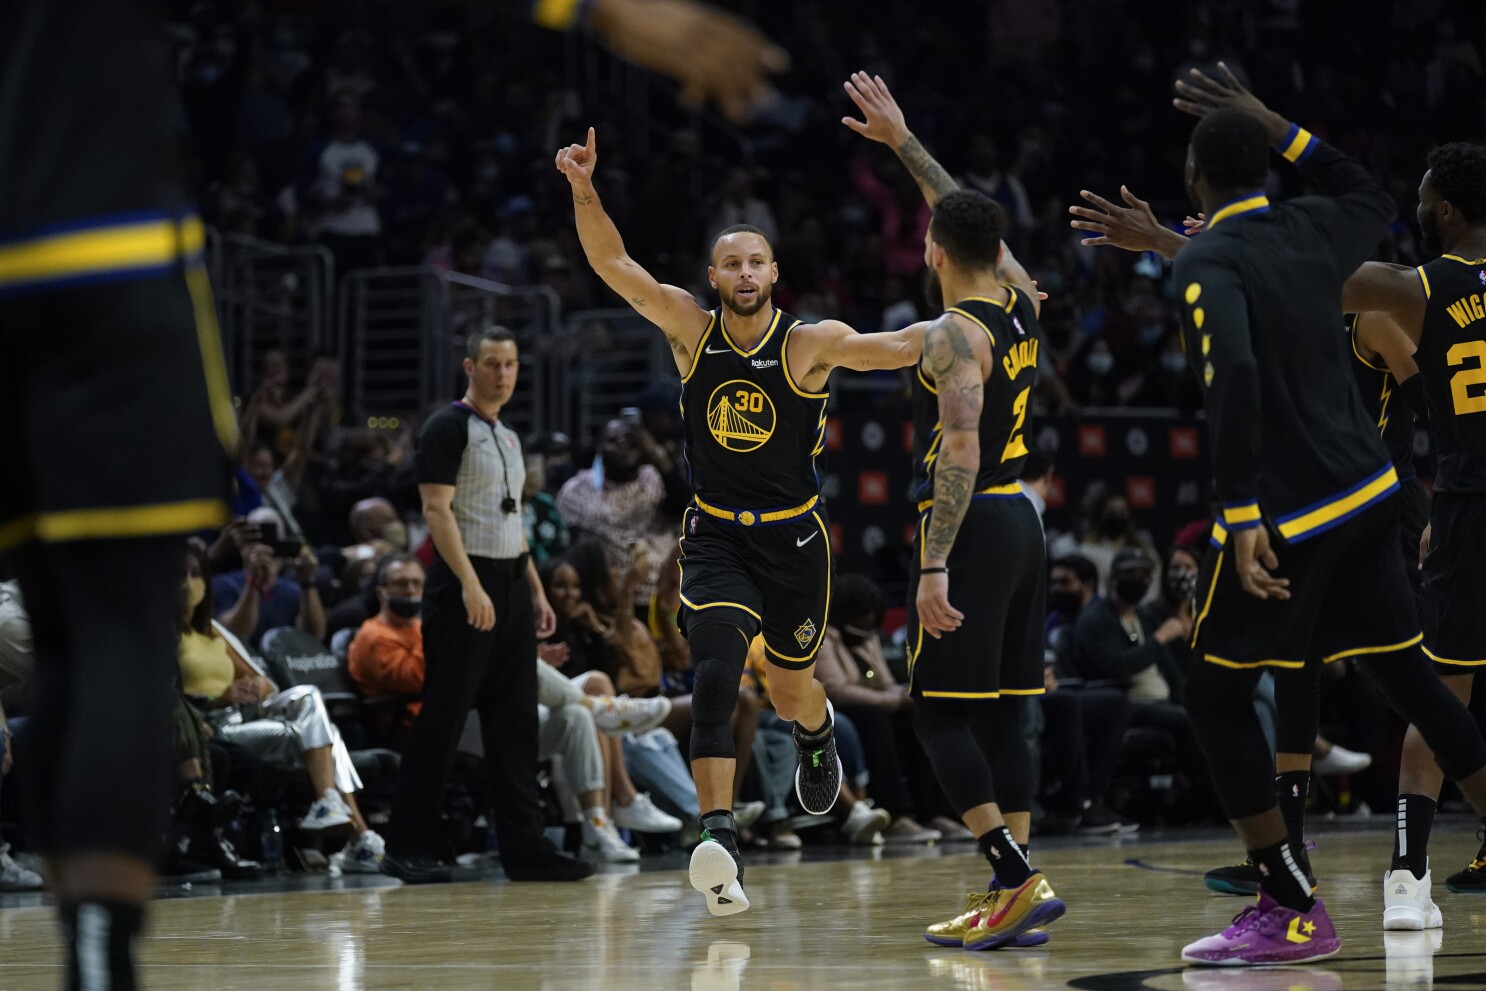 Curry has 33 points, Warriors beat Clippers for 8th straight - The San Diego Union-Tribune